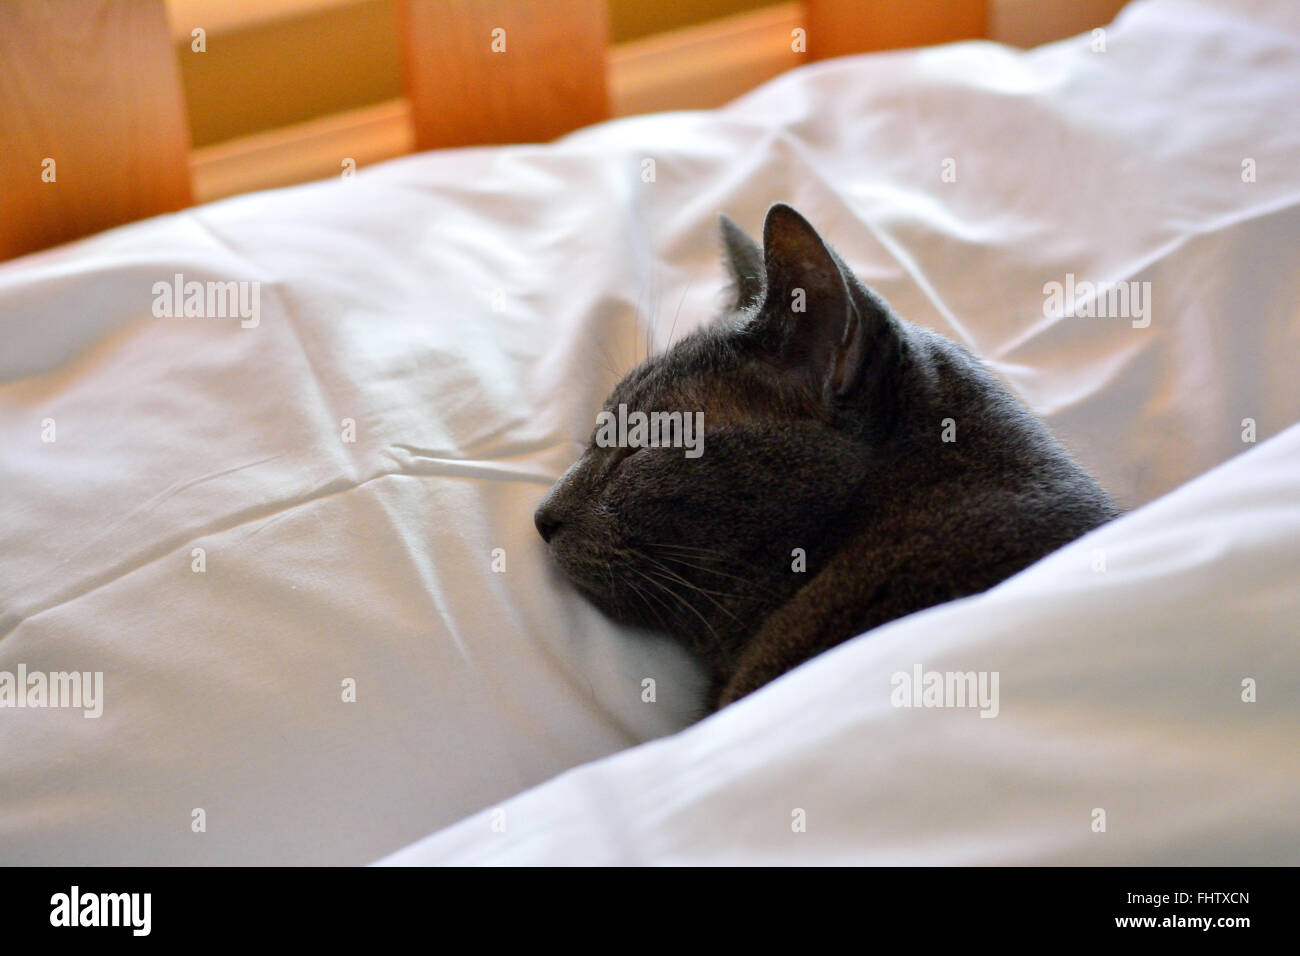 Cat sleeping in bed with head on pillow under duvet covering its body Stock Photo